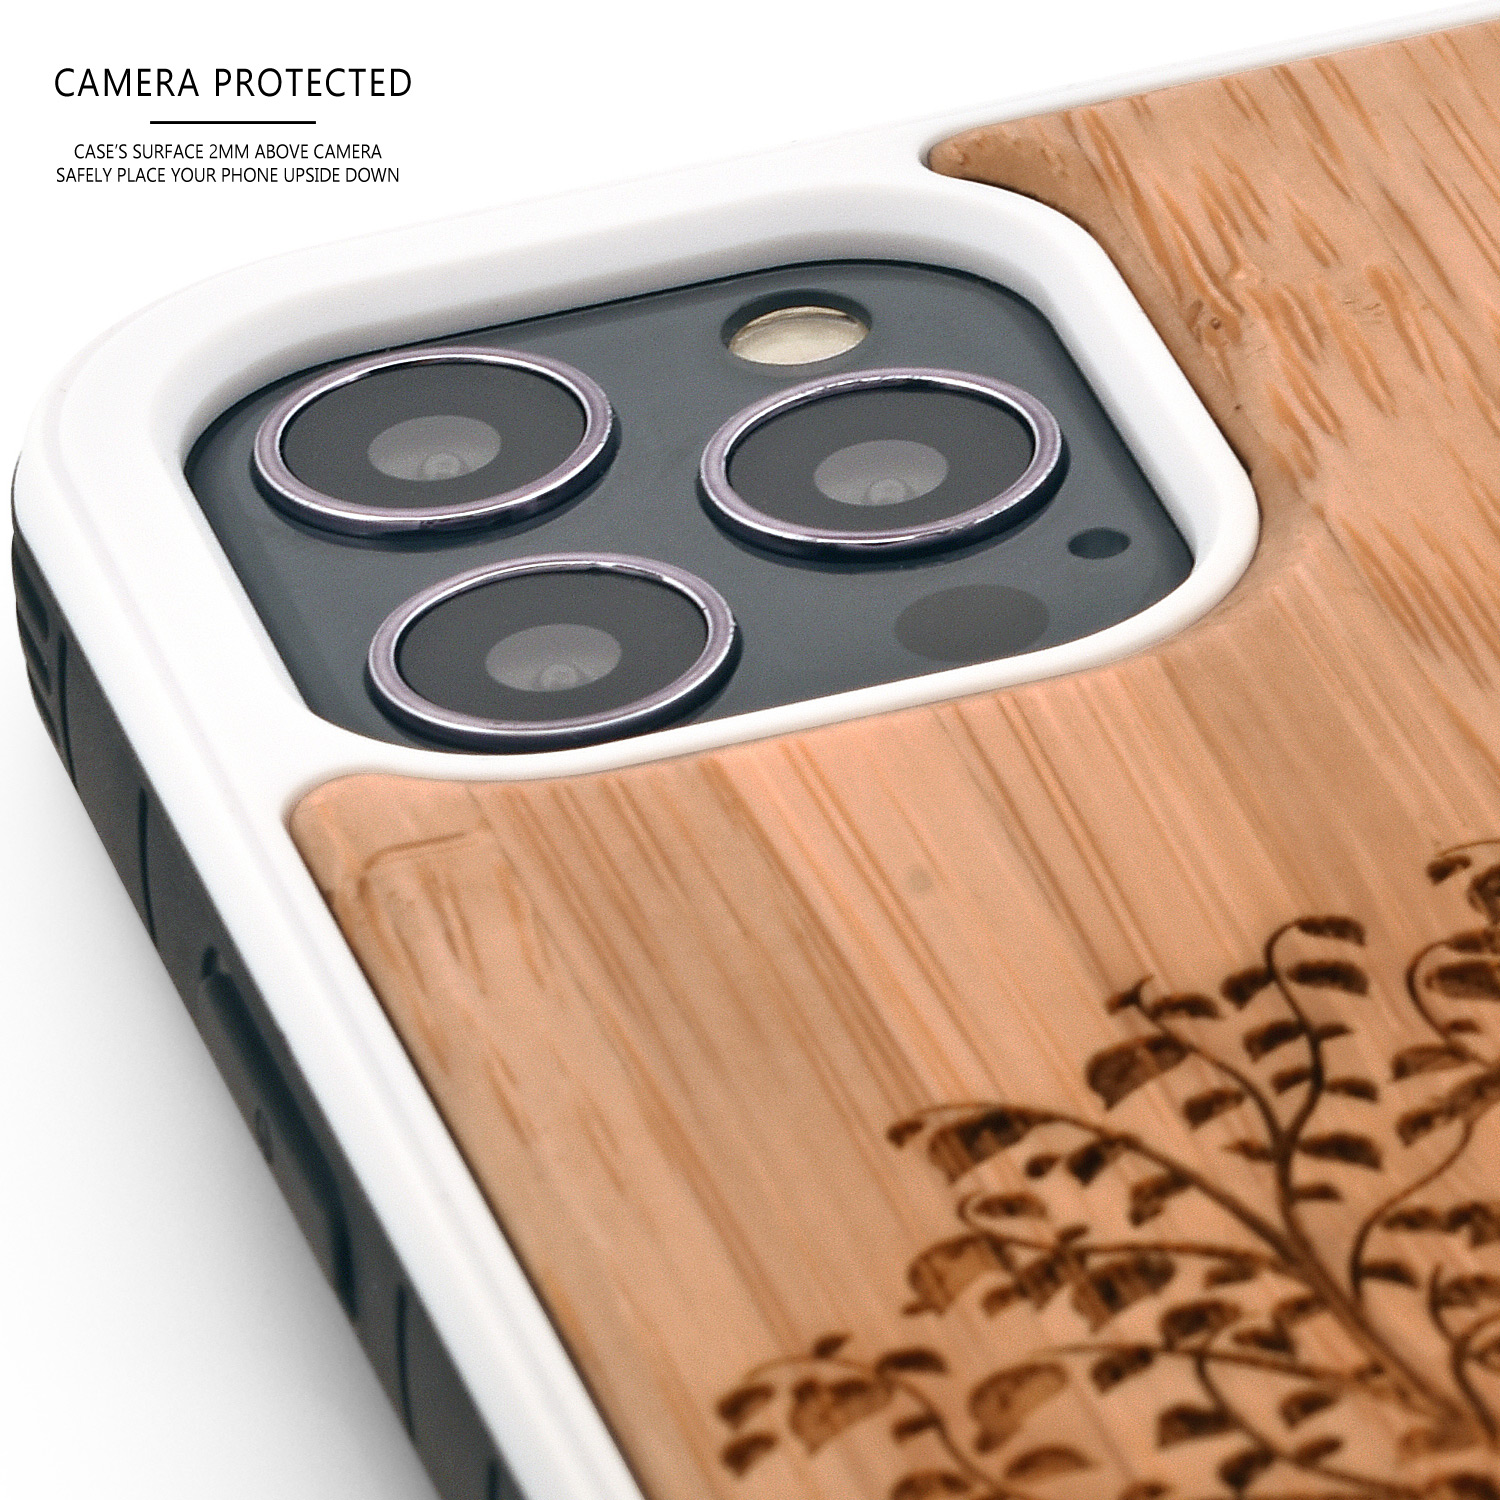 Bamboo wood phone case for iPhone 12 with tree print - camera